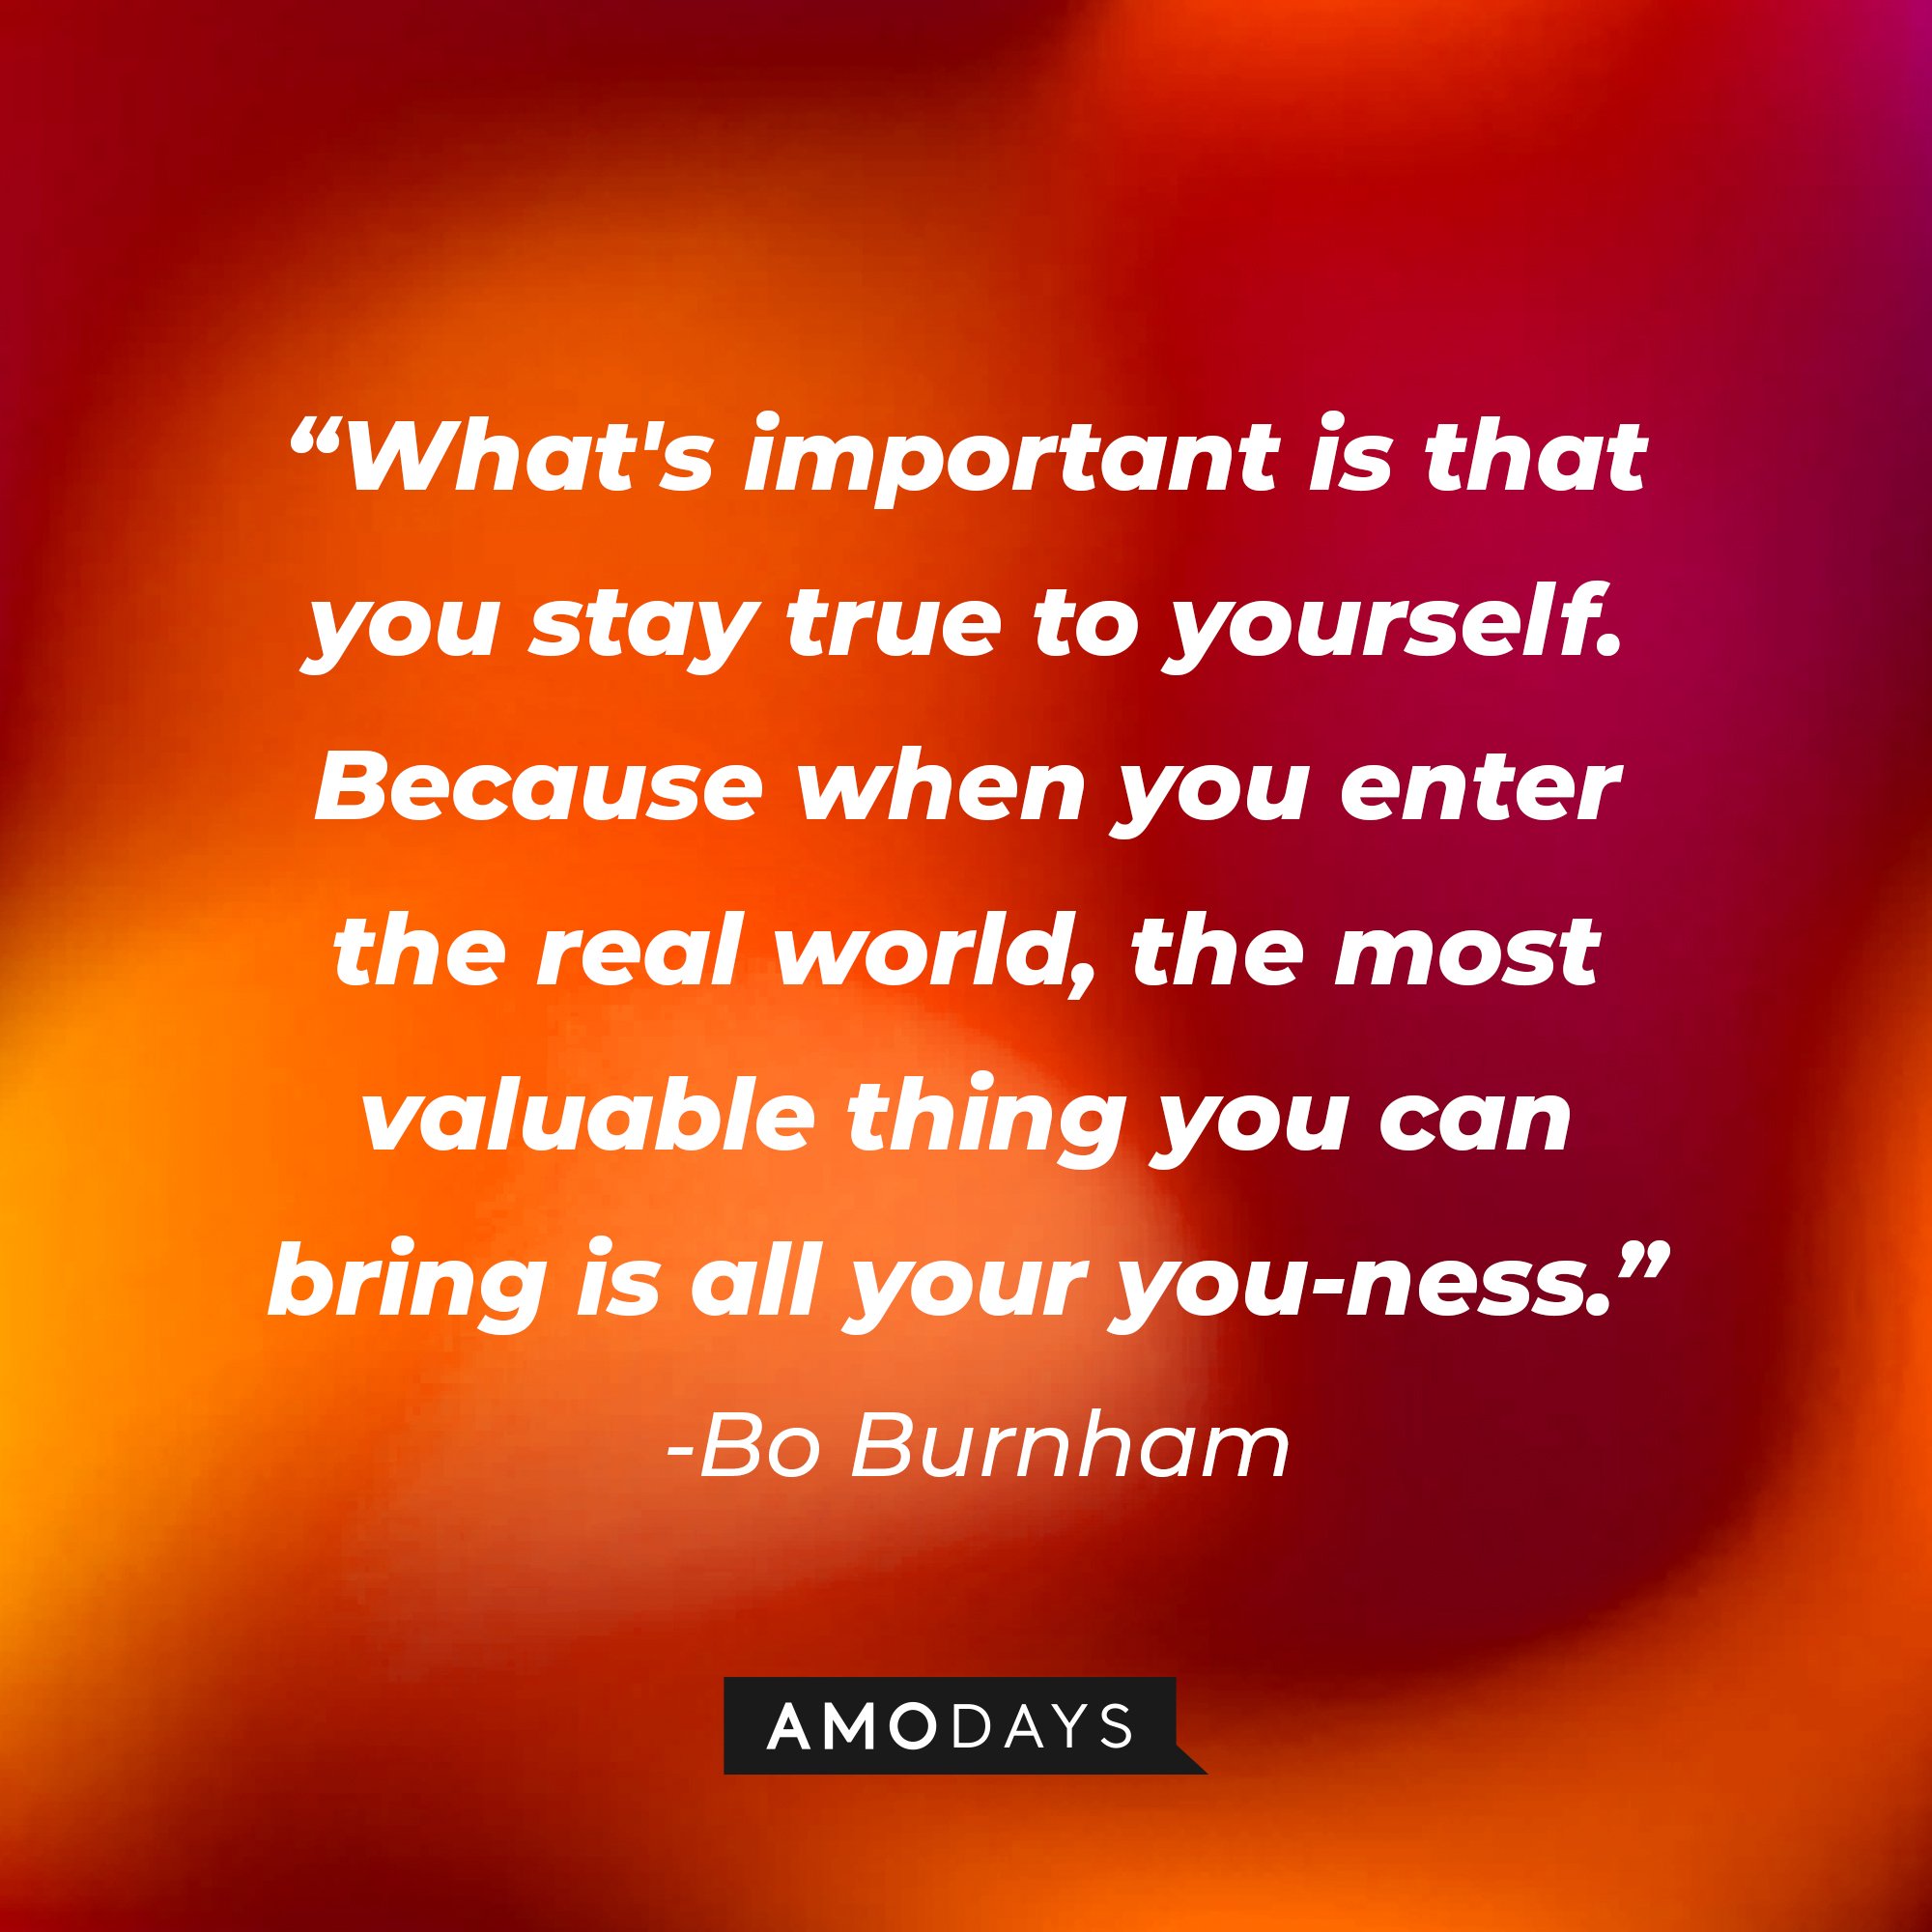 Bo Burnham’s quote: "What's important is that you stay true to yourself. Because when you enter the real world, the most valuable thing you can bring is all your you-ness." | Image: AmoDays 